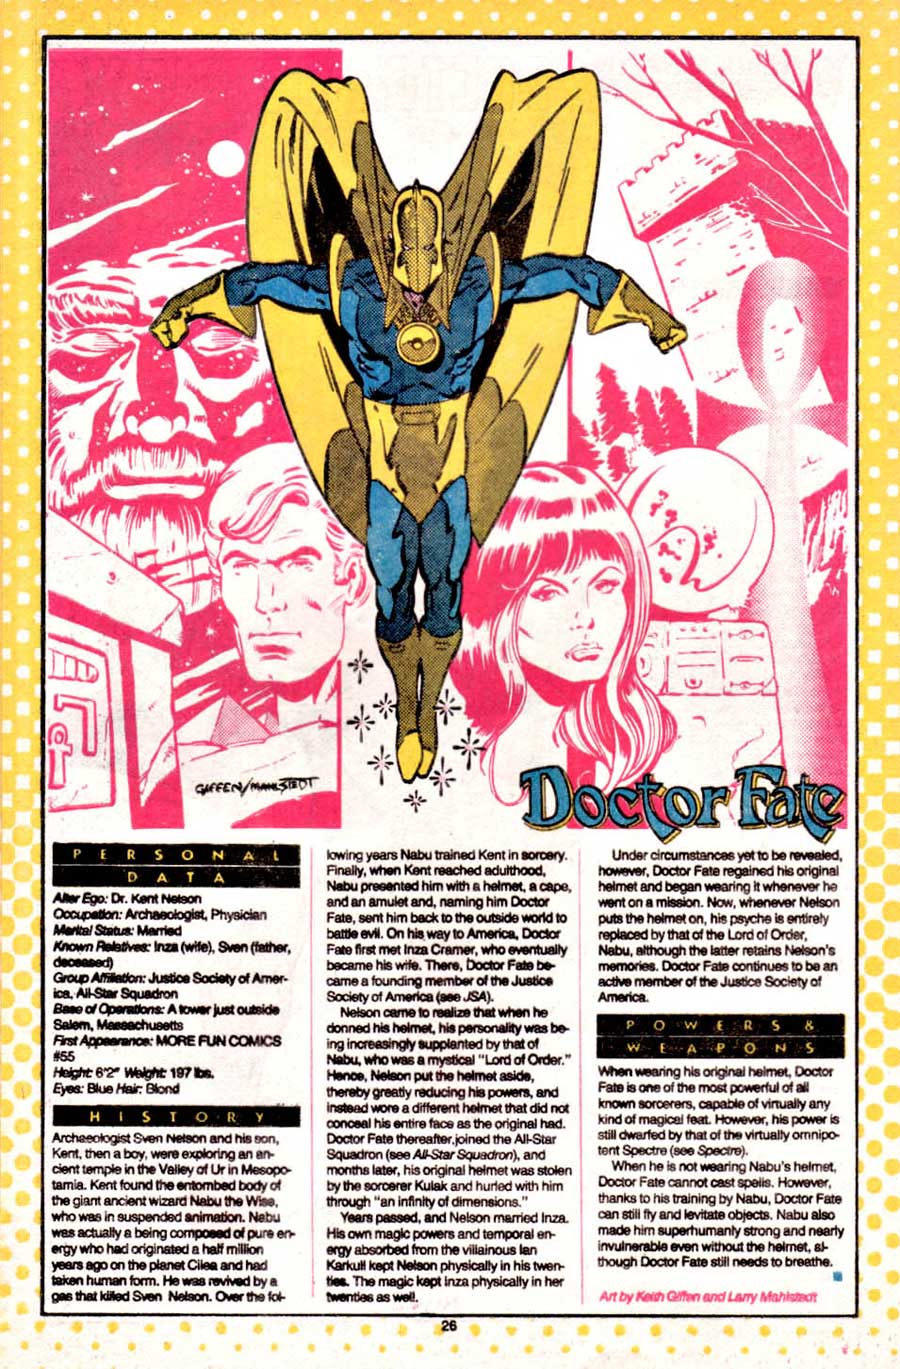 Doctor Fate by Keith Giffen and Larry Mahlstedt for Who's Who podcast